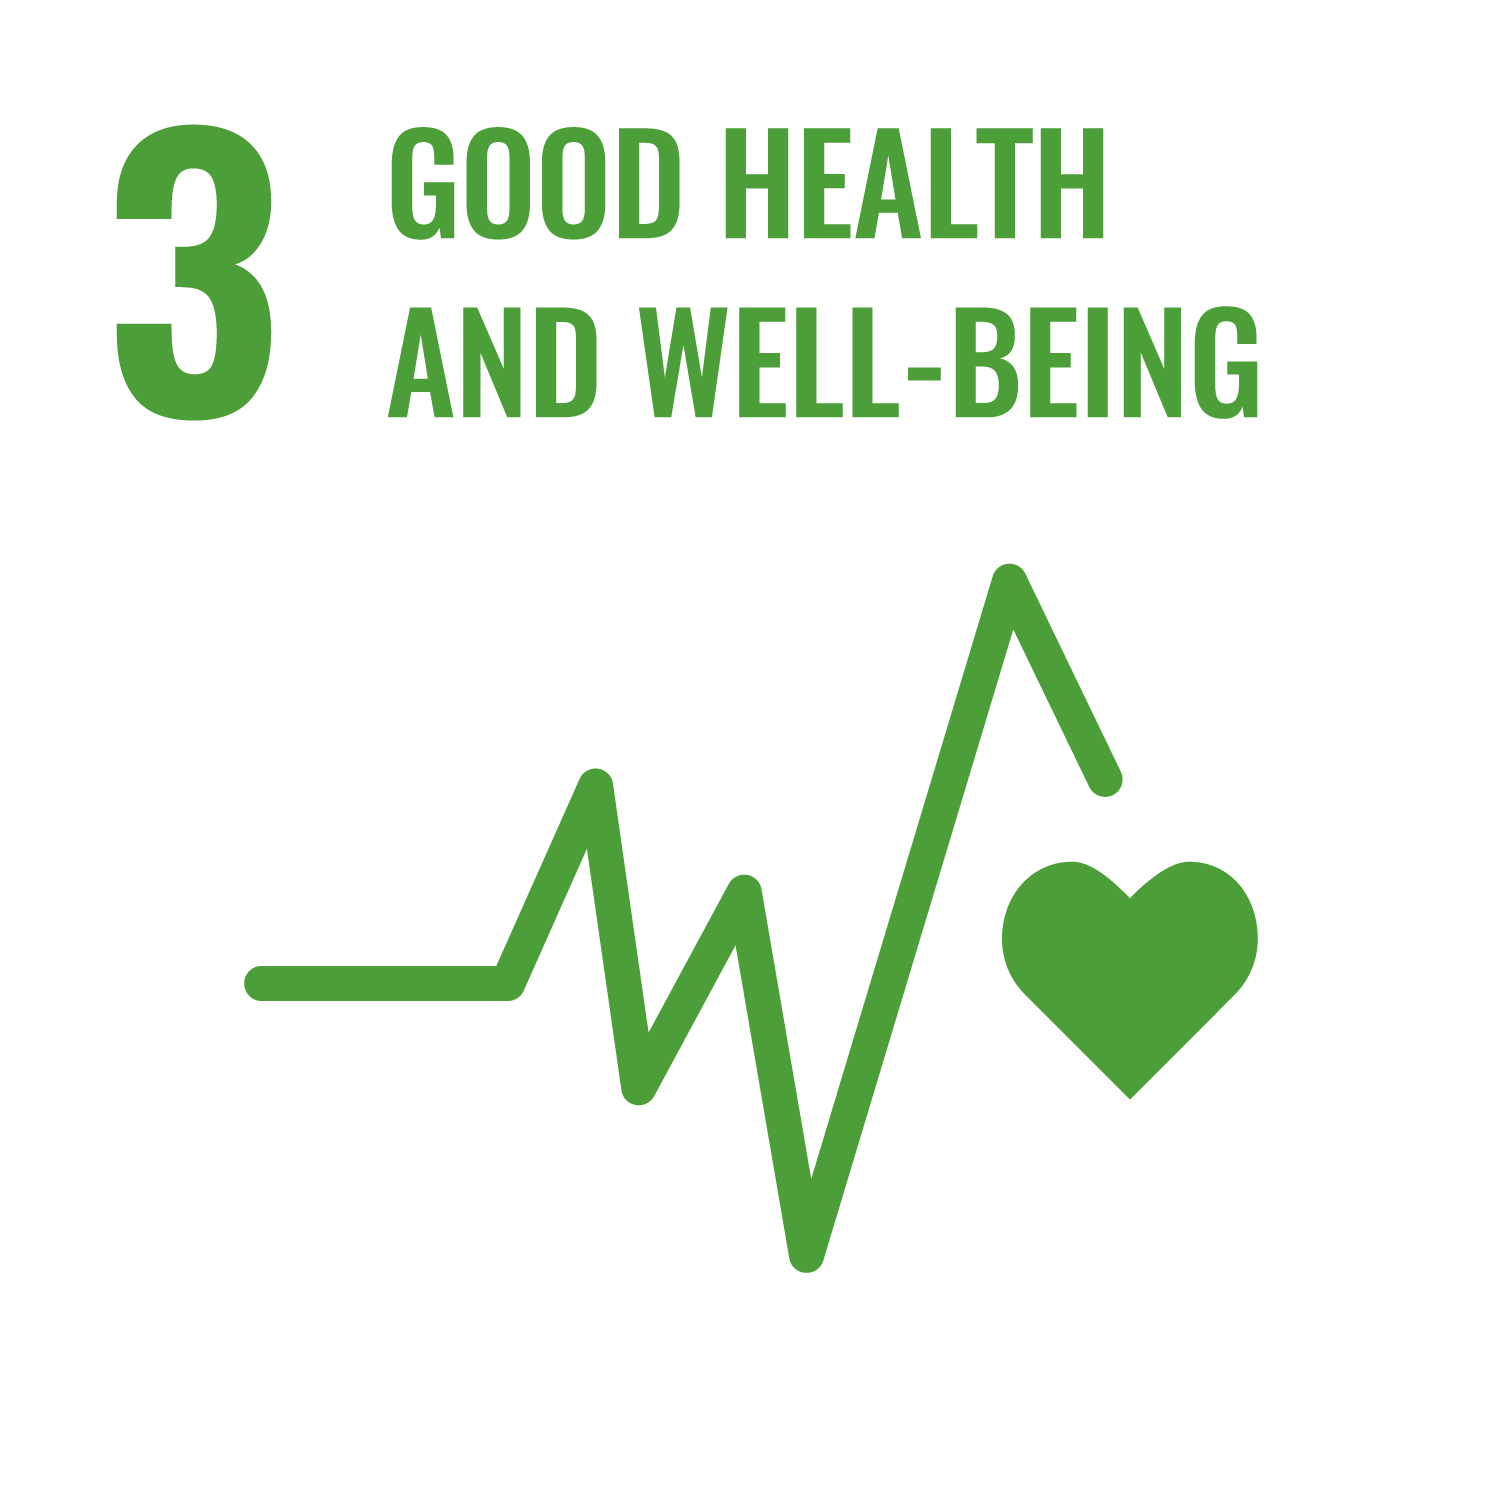 Goal 3 - Good health and well-being